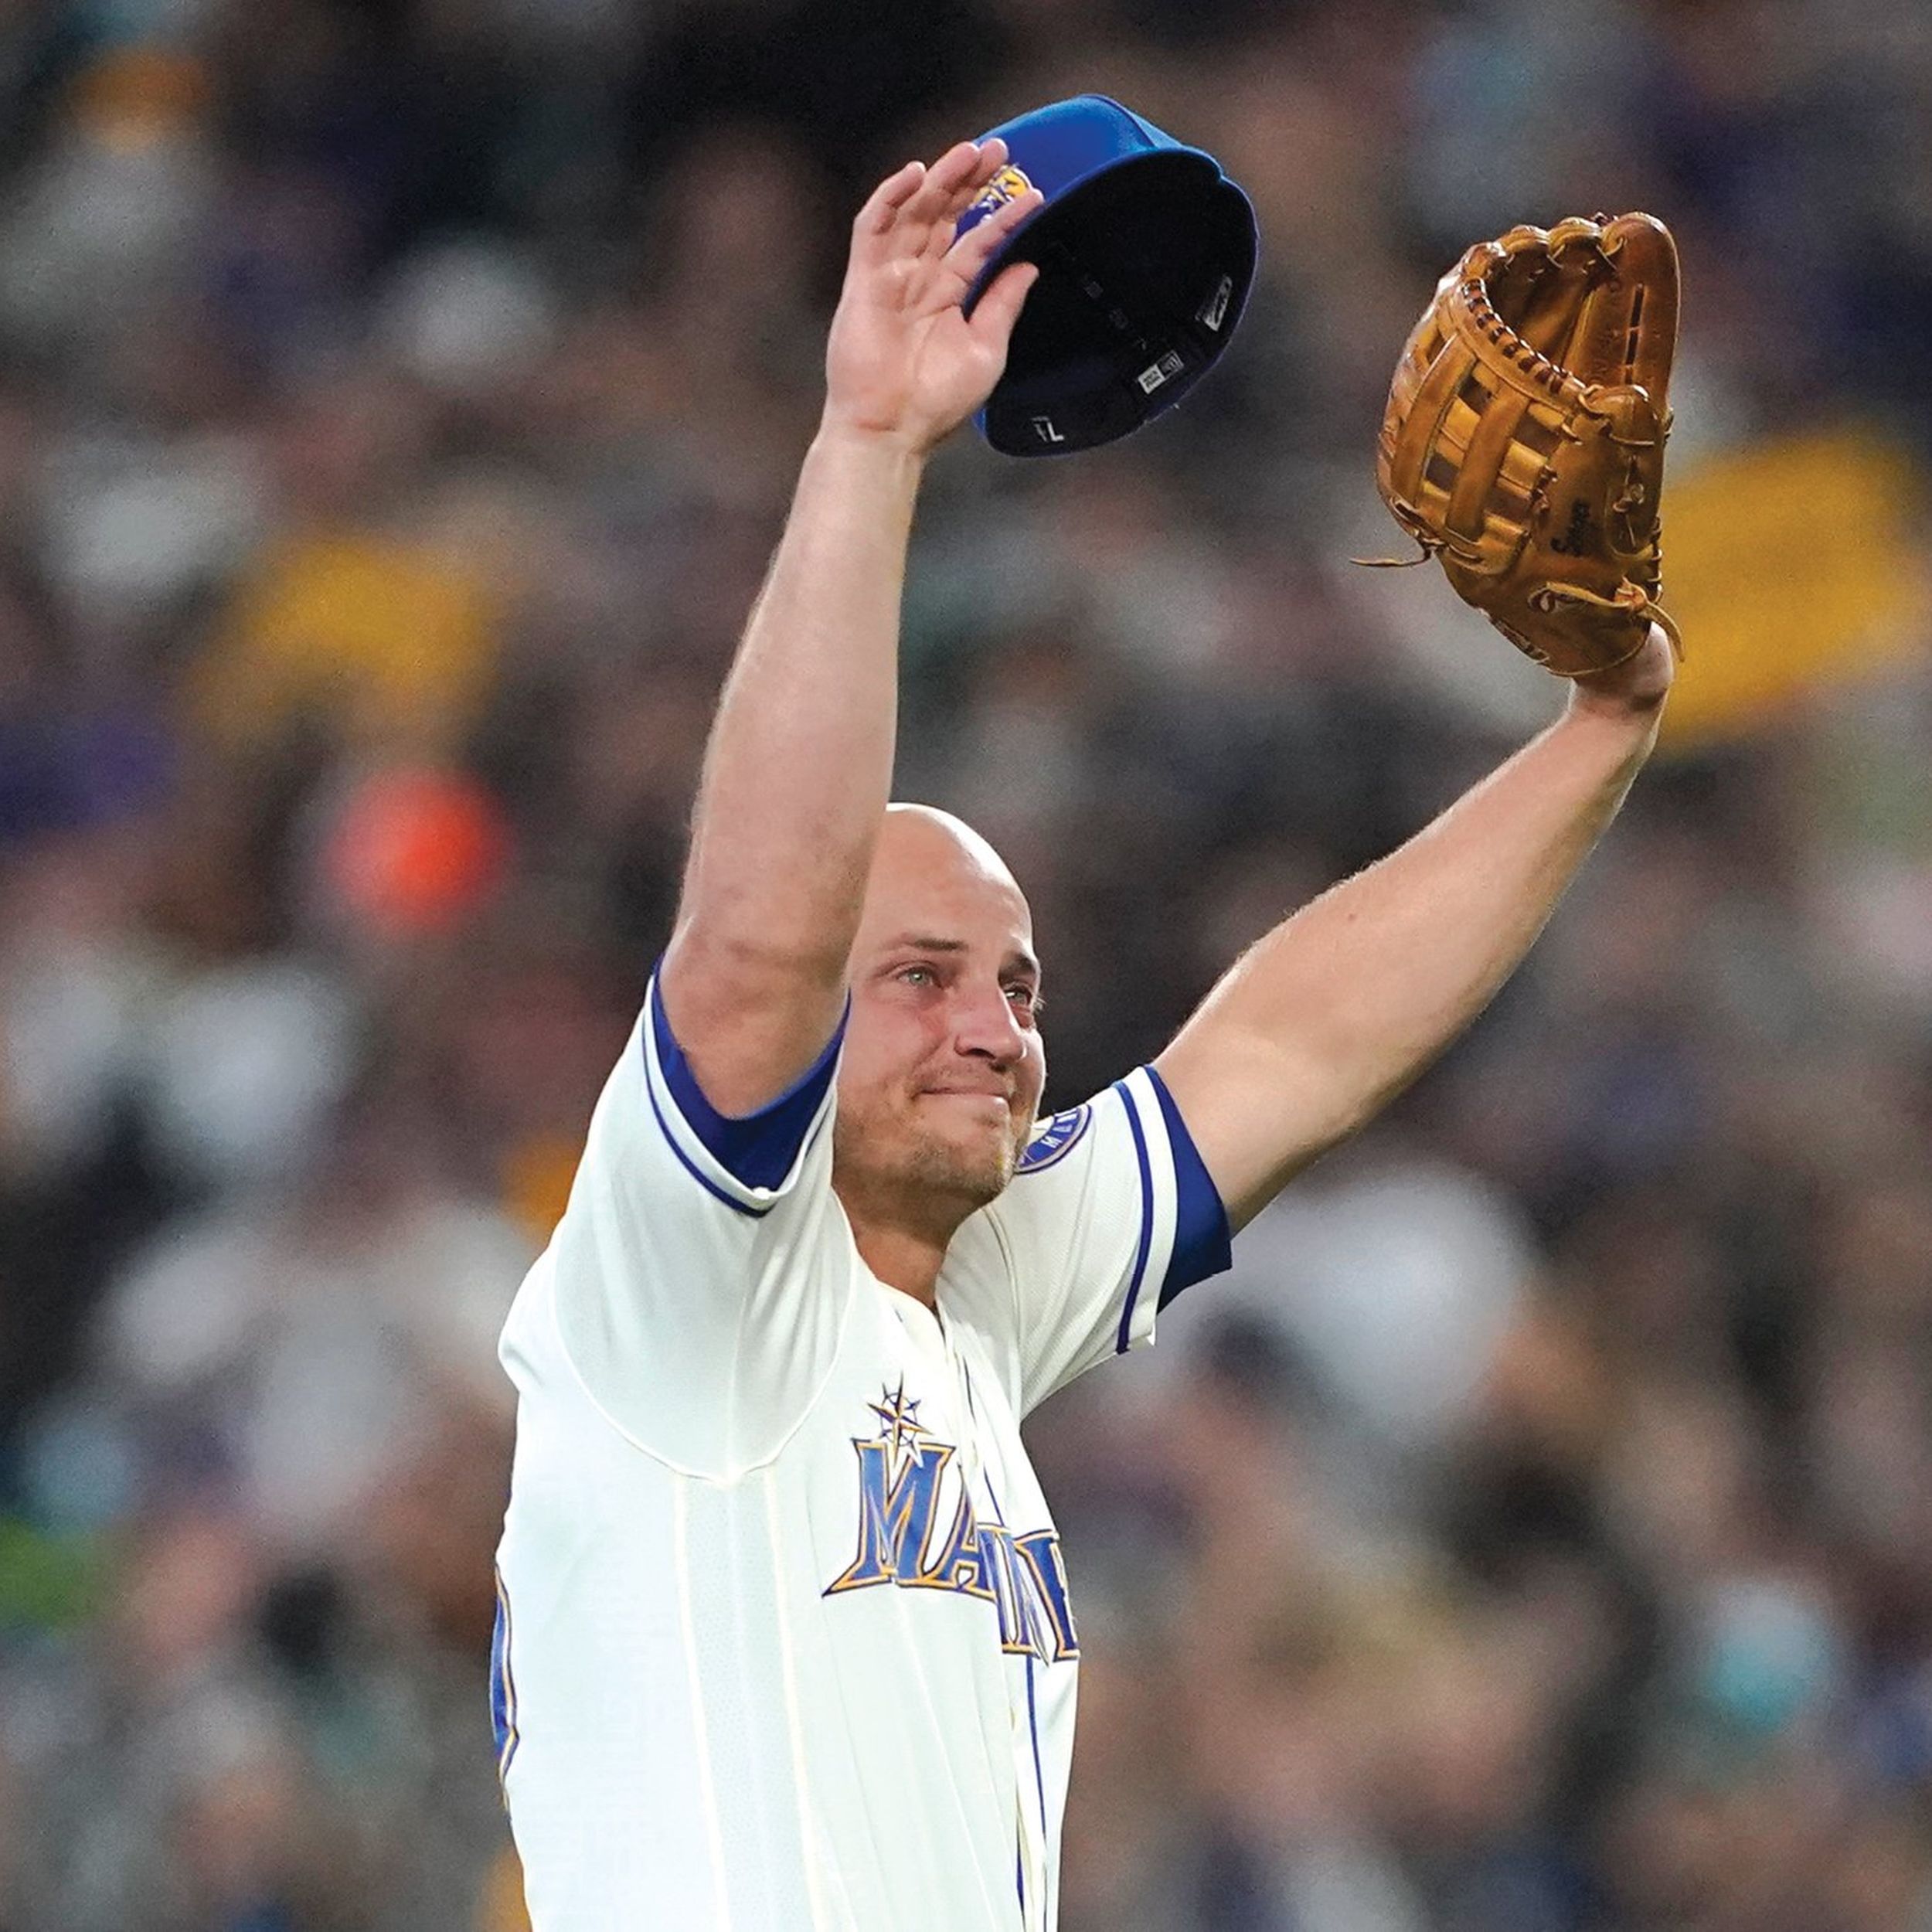 Kyle Seager announces retirement after 11 seasons with Mariners